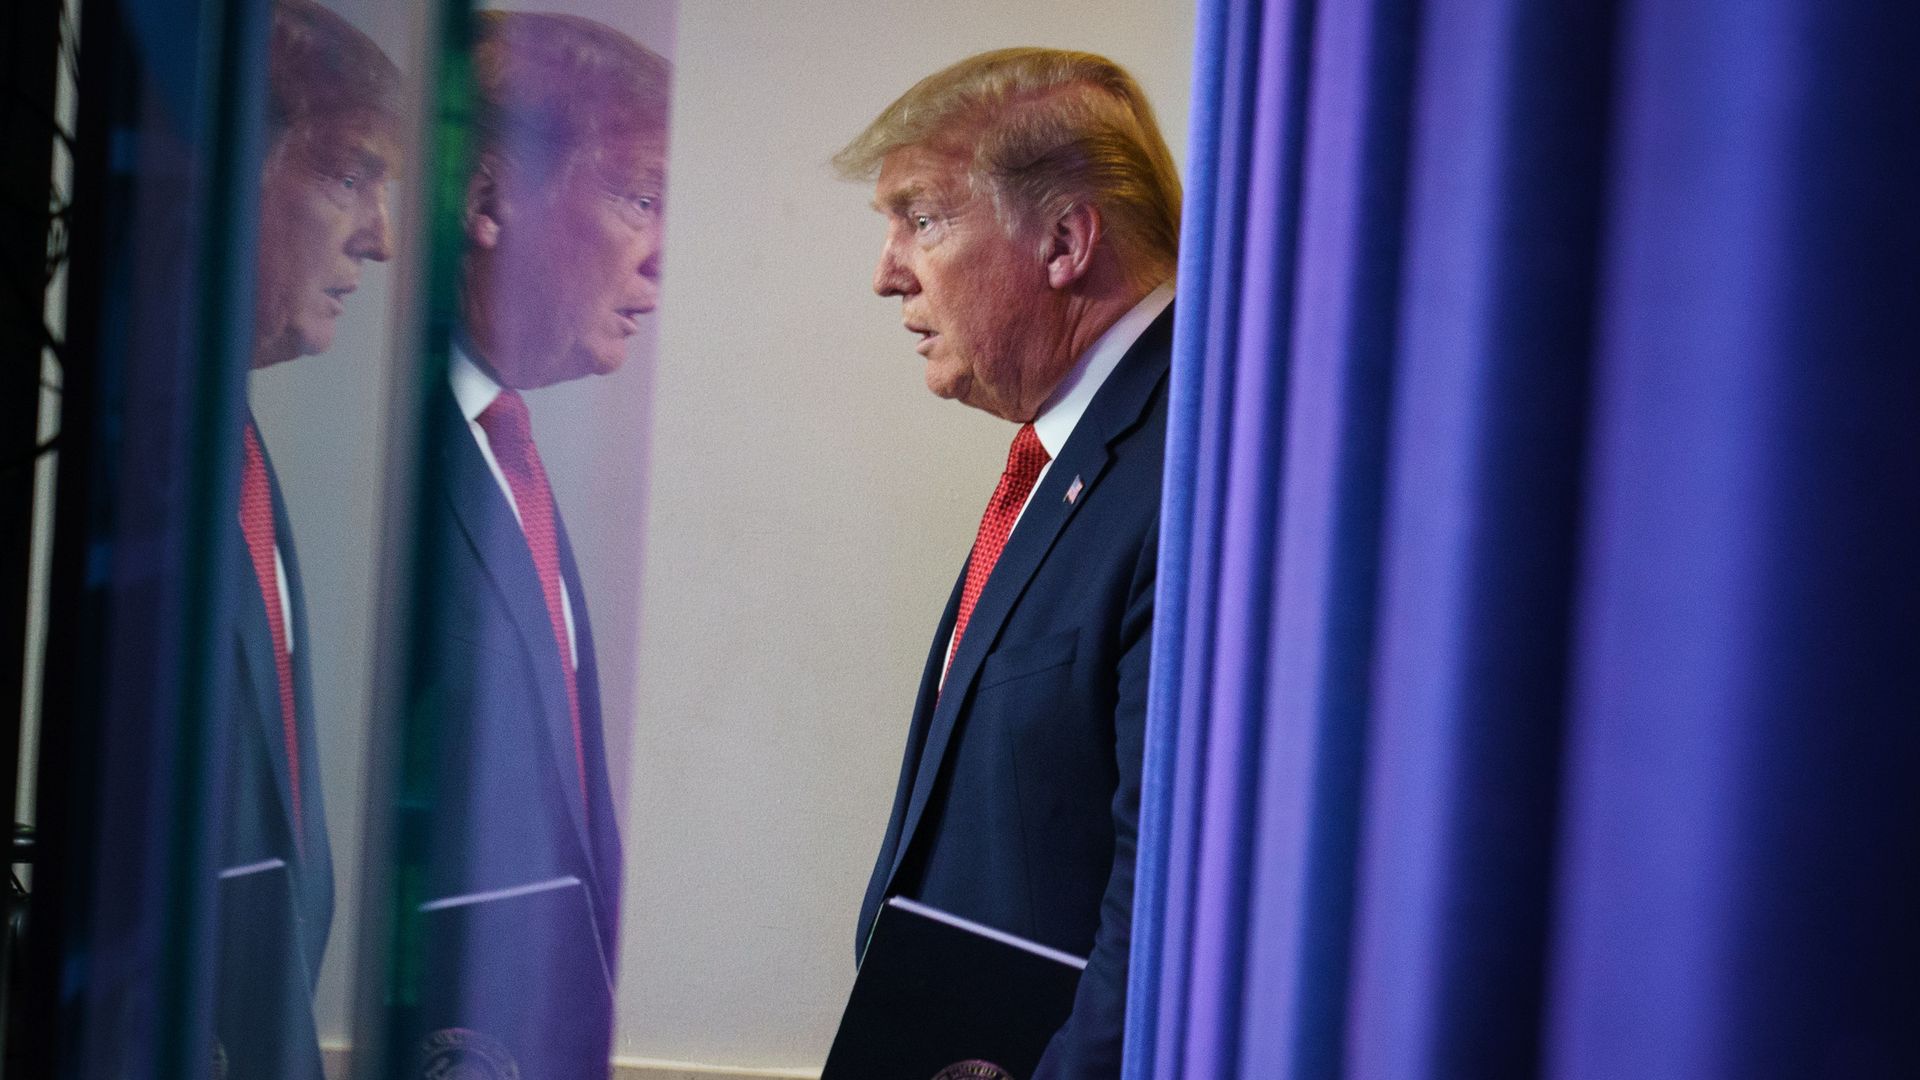 In this image, Trump stands in a mirror facing himself